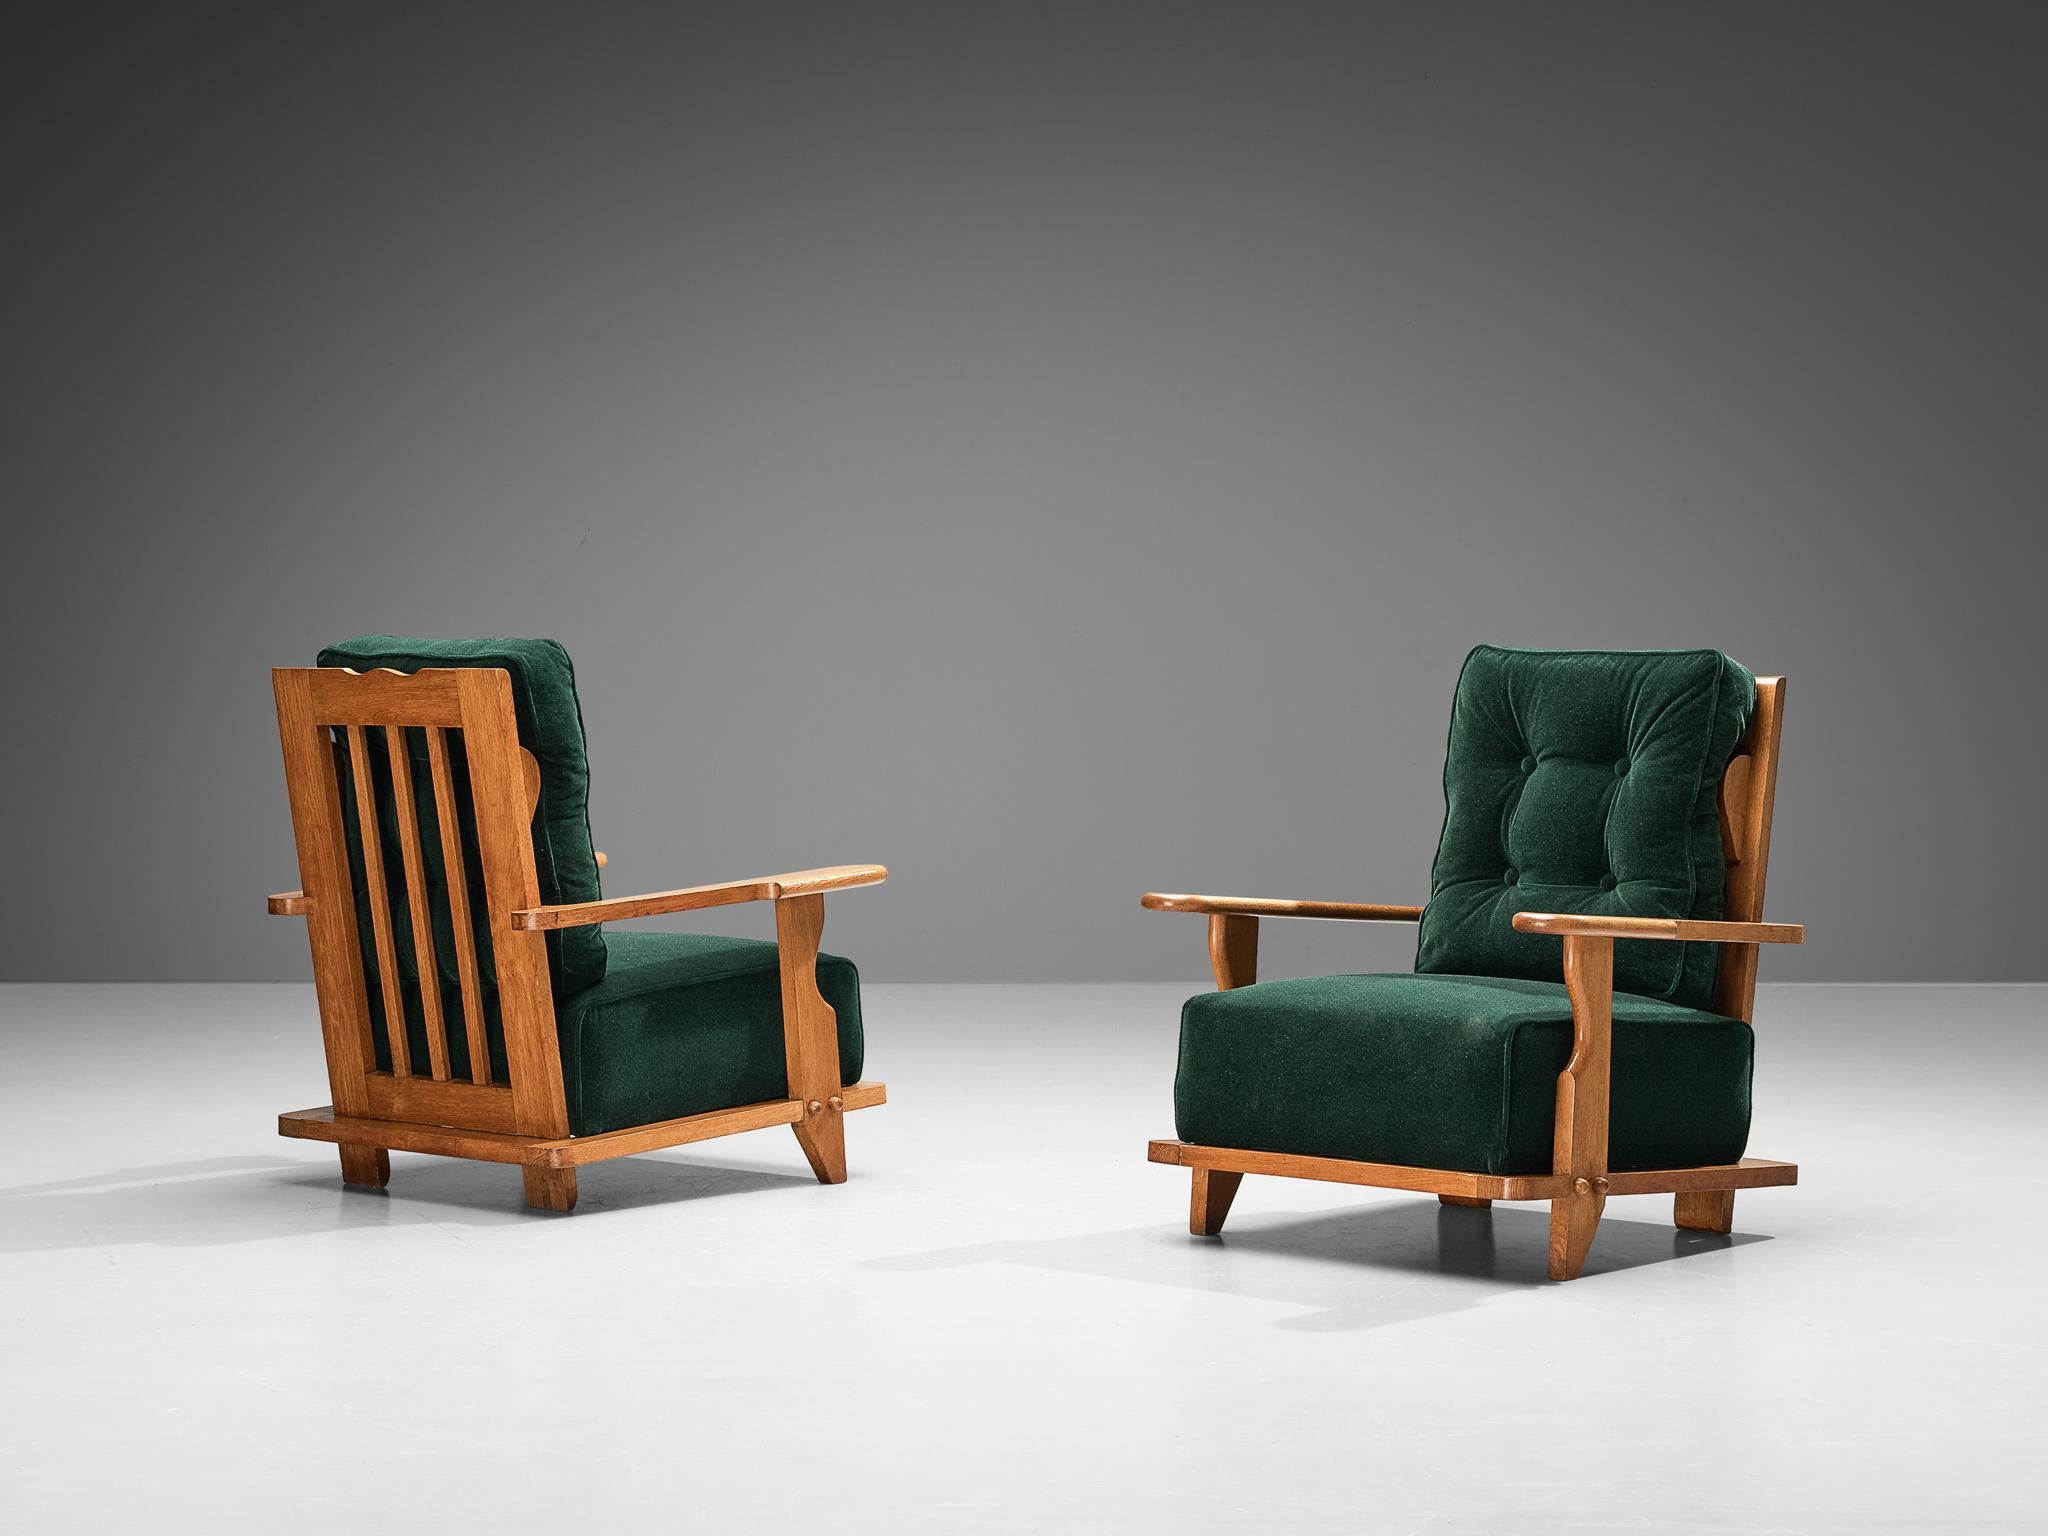 Guillerme & Chambron for Votre Maison, pair of lounge chairs, oak, reupholstered in green mohair, France, 1960s

A great pair of comfortable armchairs with high backs. These chairs have very interesting details. The armrests are pretty broad and